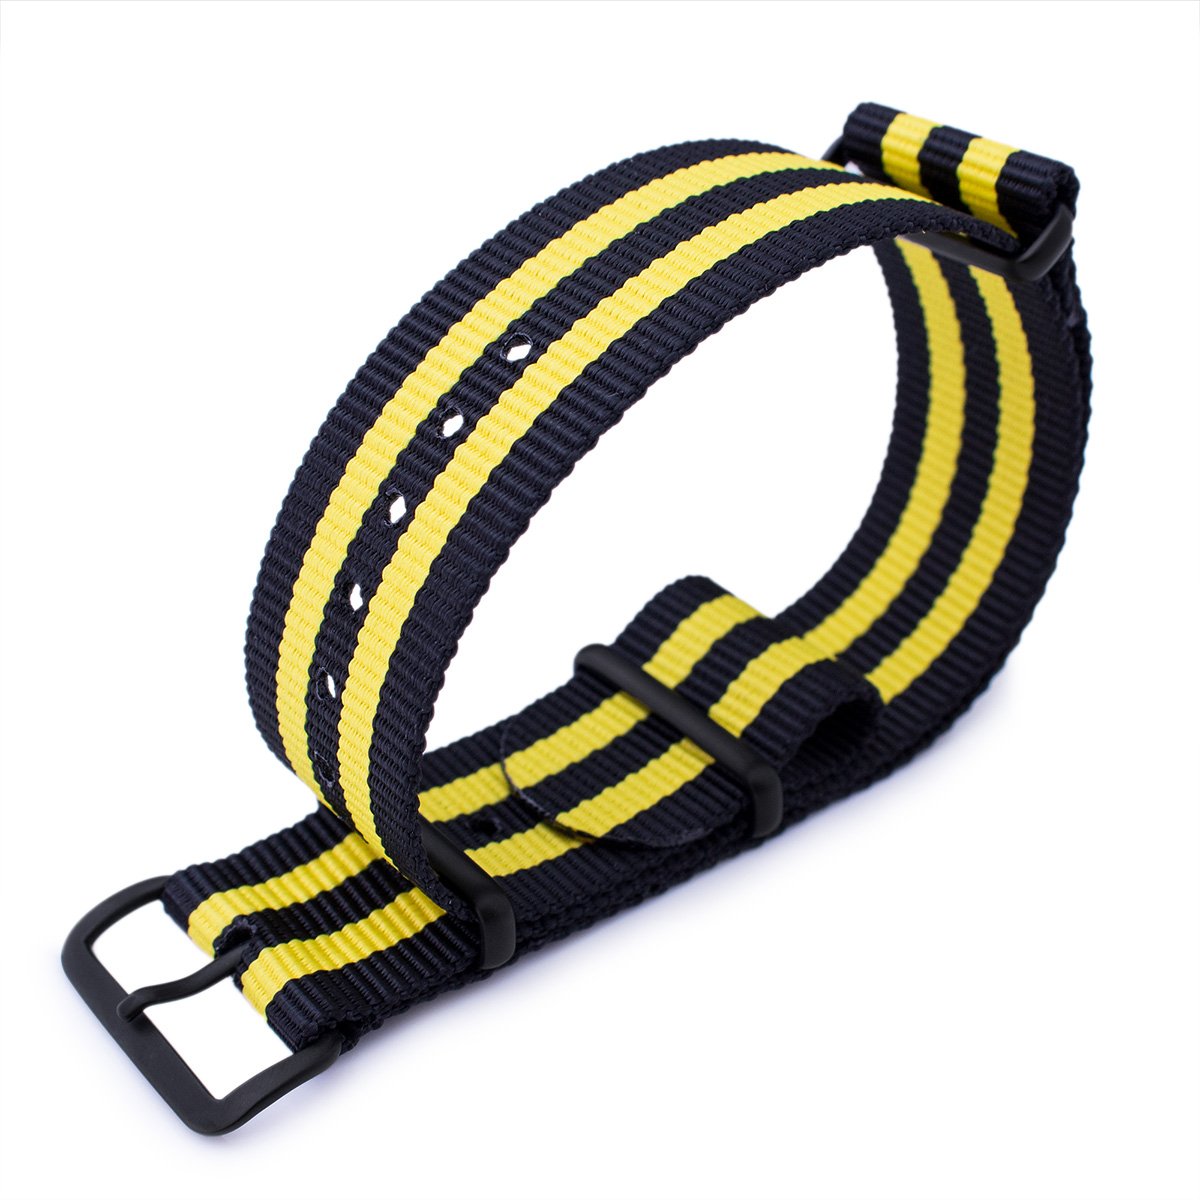 MiLTAT 20mm or 22mm G10 military watch strap ballistic nylon armband PVD Black Black & Yellow Strapcode Watch Bands